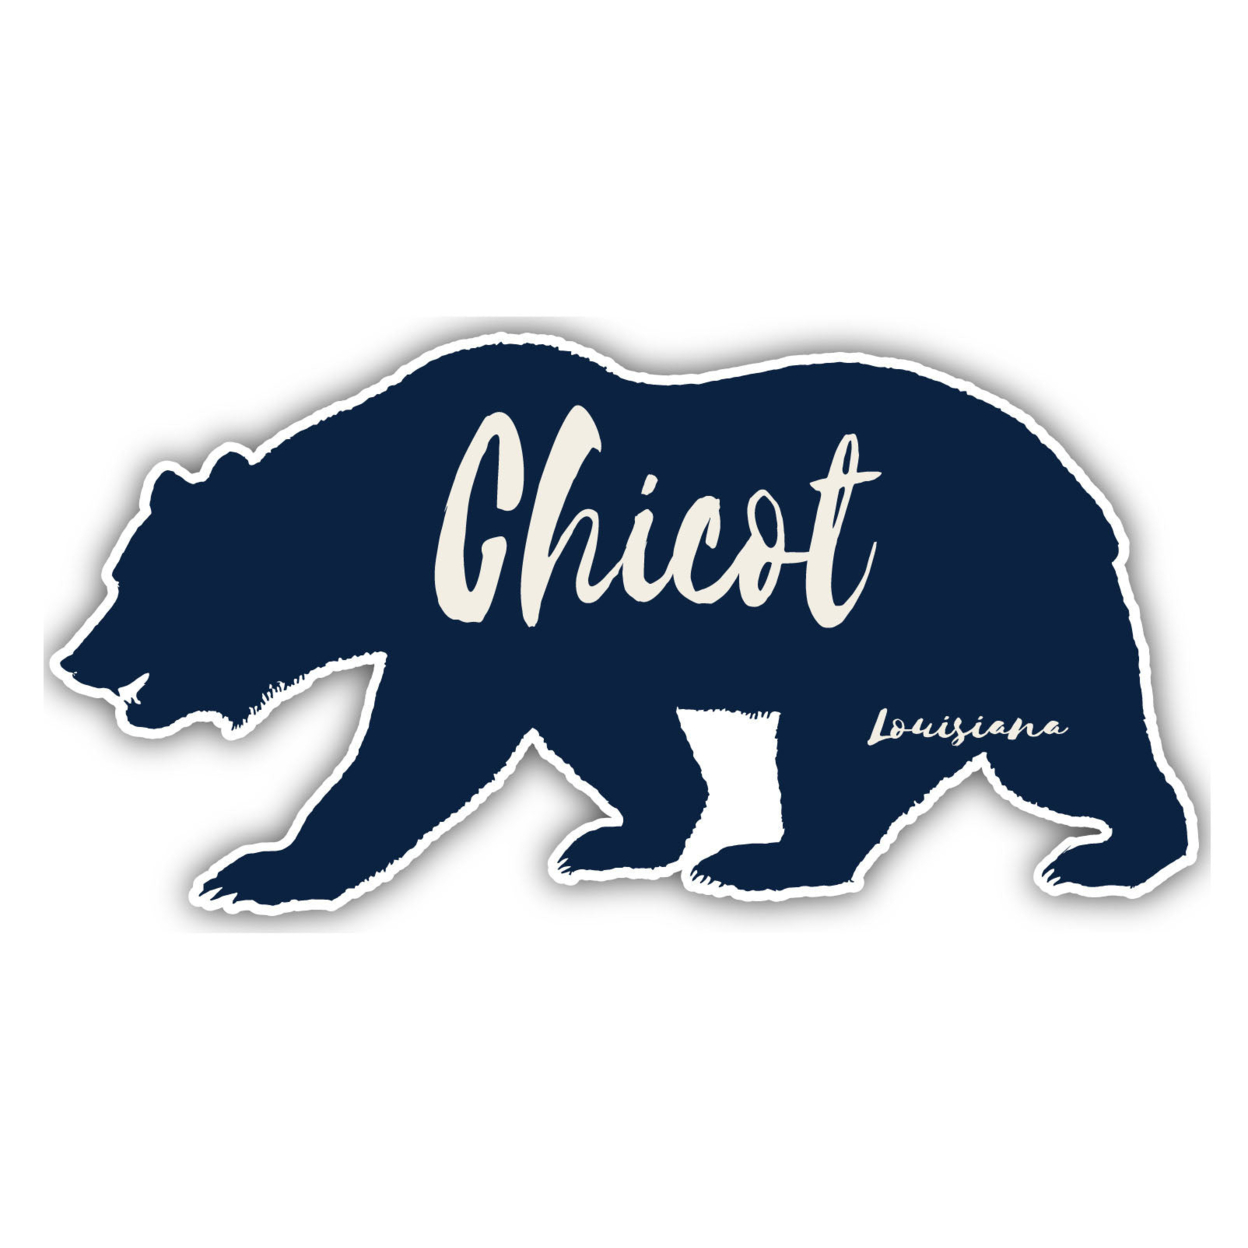 Chicot Louisiana Souvenir Decorative Stickers (Choose Theme And Size) - 4-Pack, 6-Inch, Bear